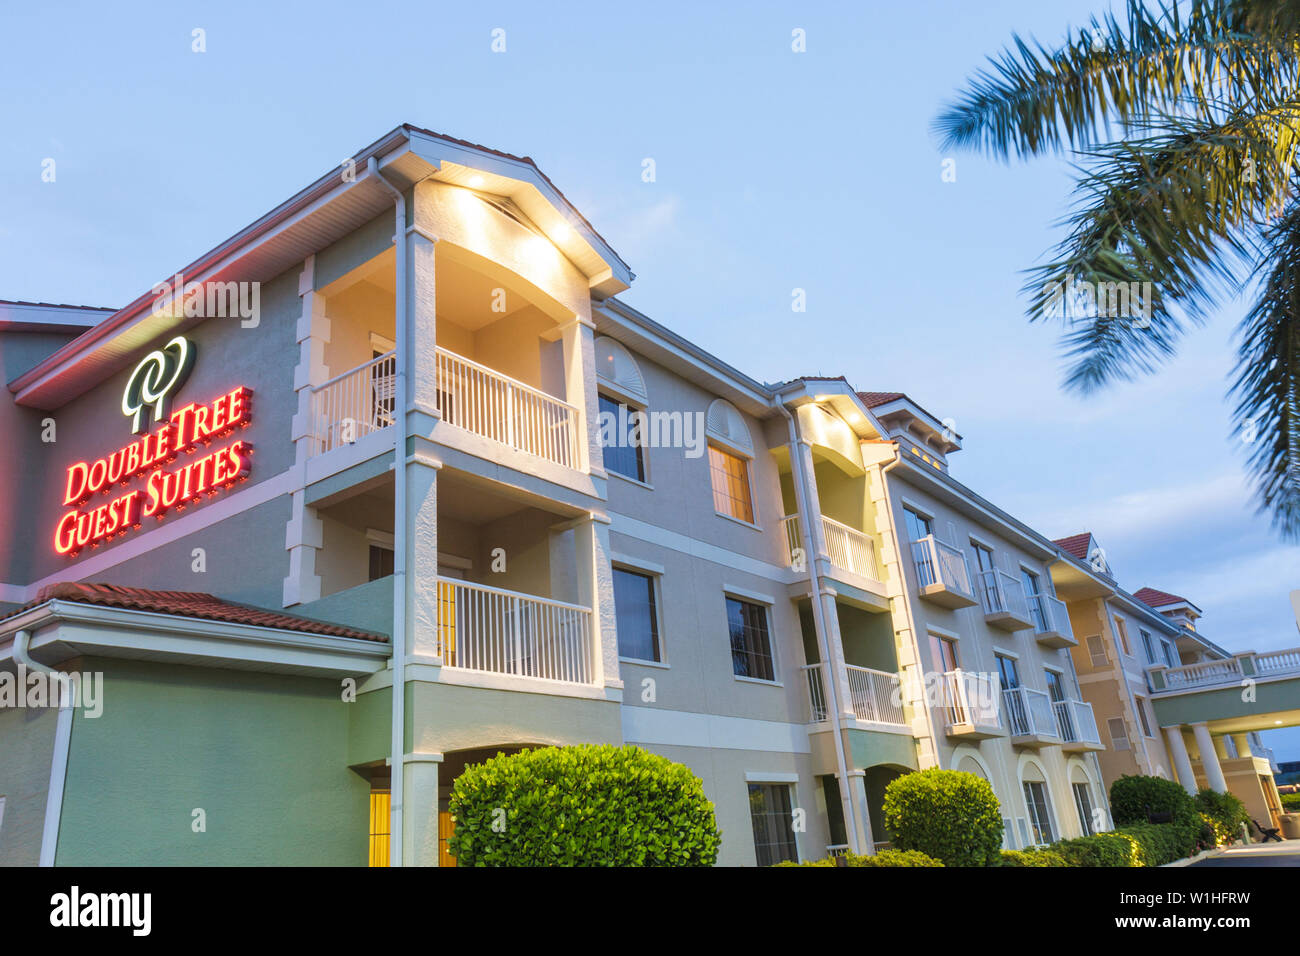 Naples Florida,Hilton DoubleTree Guest Suites,chain,hotel,lodging,dusk,evening,sign,lights,three story building,outside exterior,front,entrance,night, Stock Photo